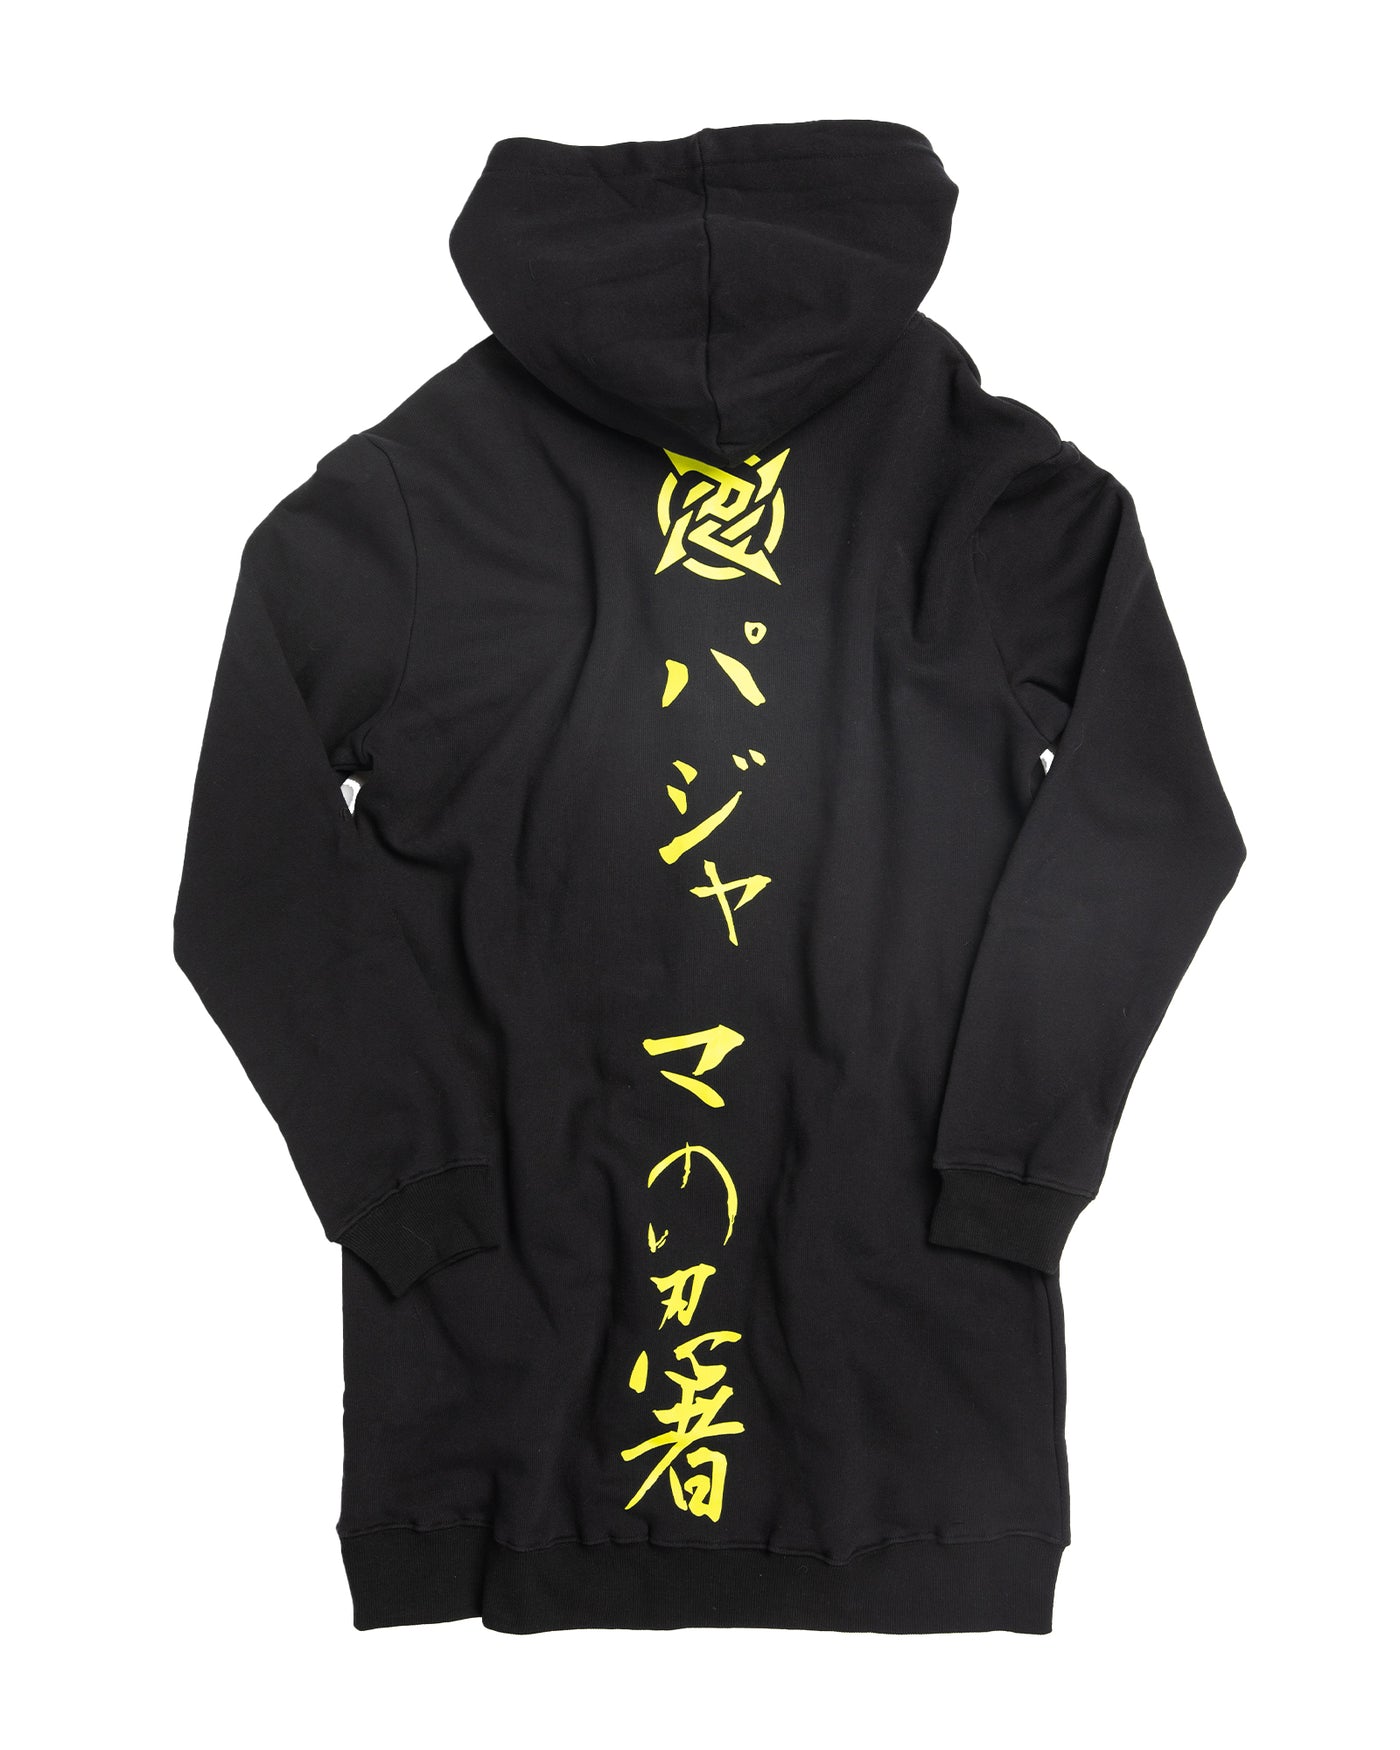 Ninjutsu Collection - Long Hoodie Black from Ninjas in Pyjamas Shop. A black long hoodie from the Ninjutsu Merch Collection, featuring the Ninjas in Pyjamas logo subtly printed on the front. This stylish and comfortable long hoodie is perfect for expressing your passion for NIP while staying cozy and on-trend.